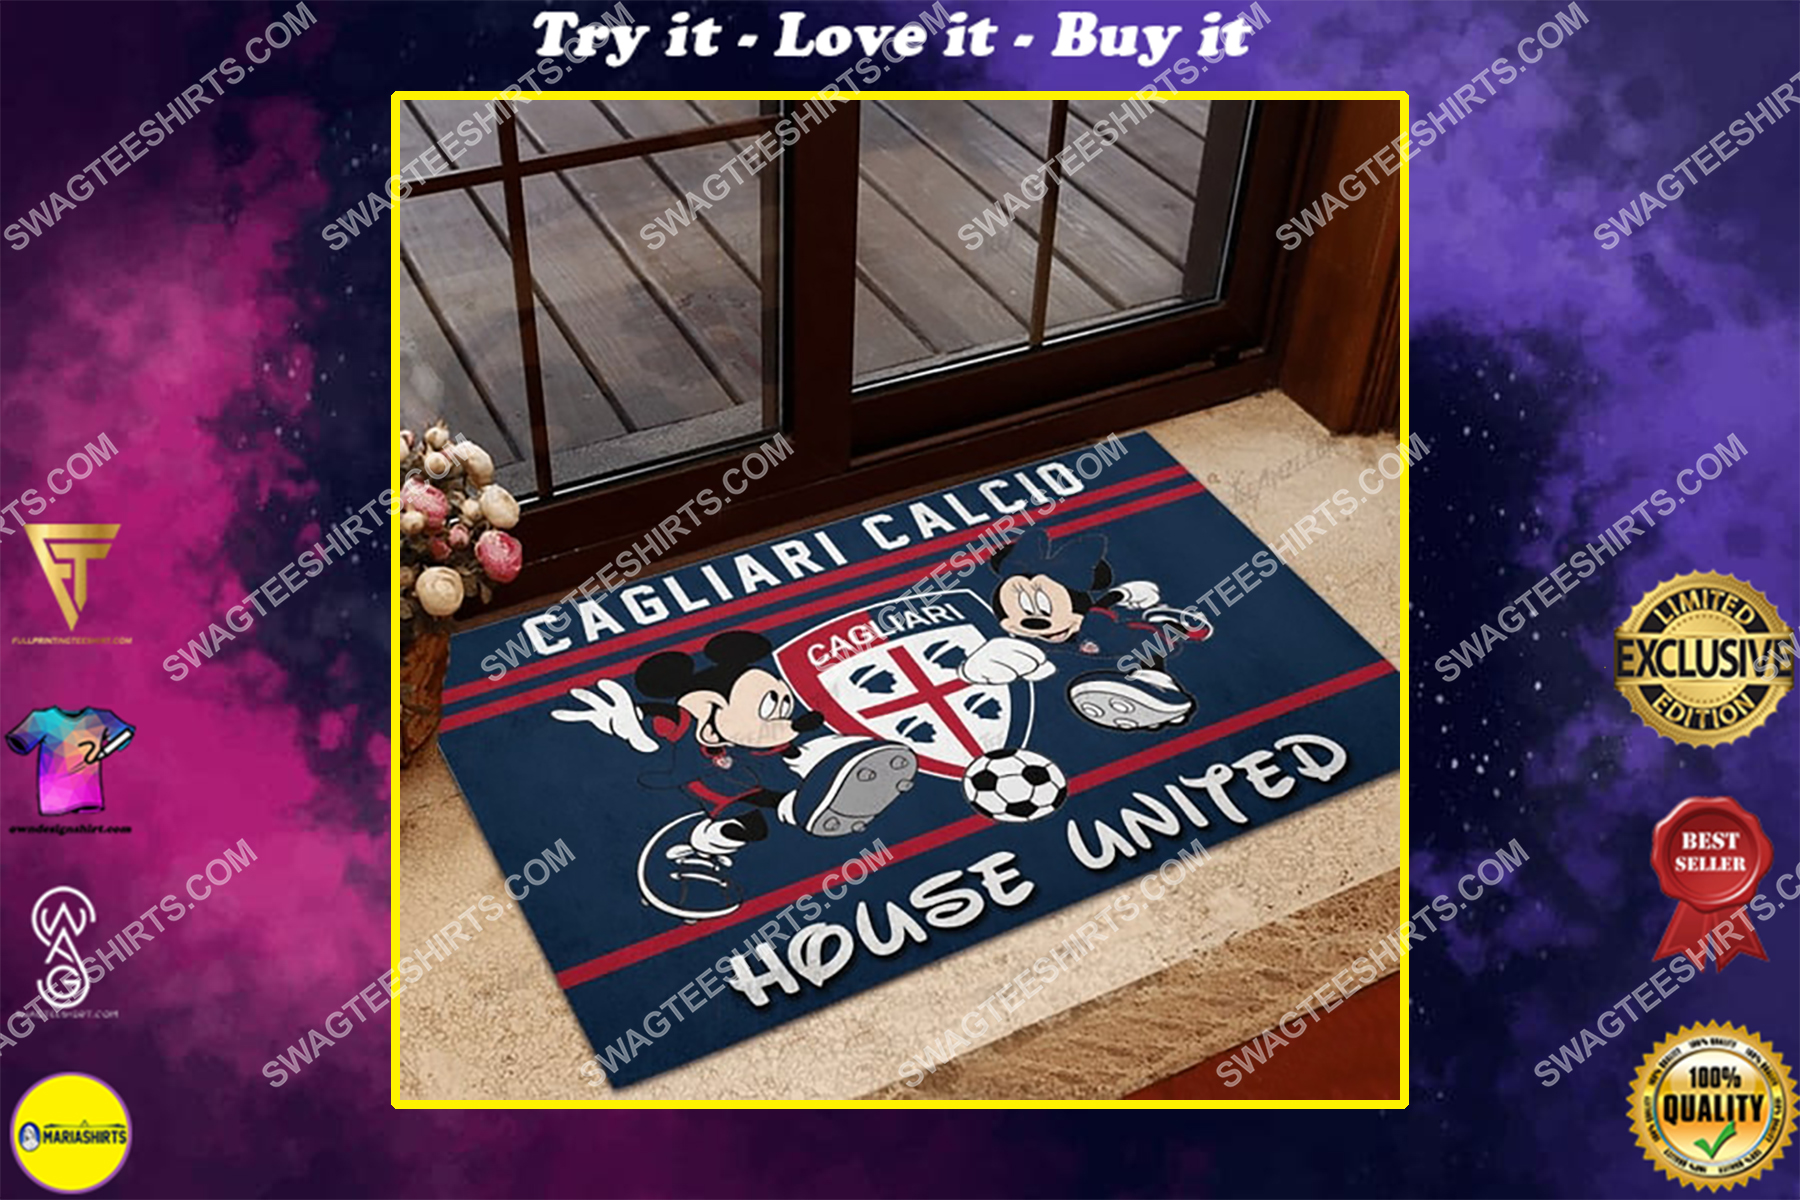 cagliari calcio house united mickey mouse and minnie mouse doormat